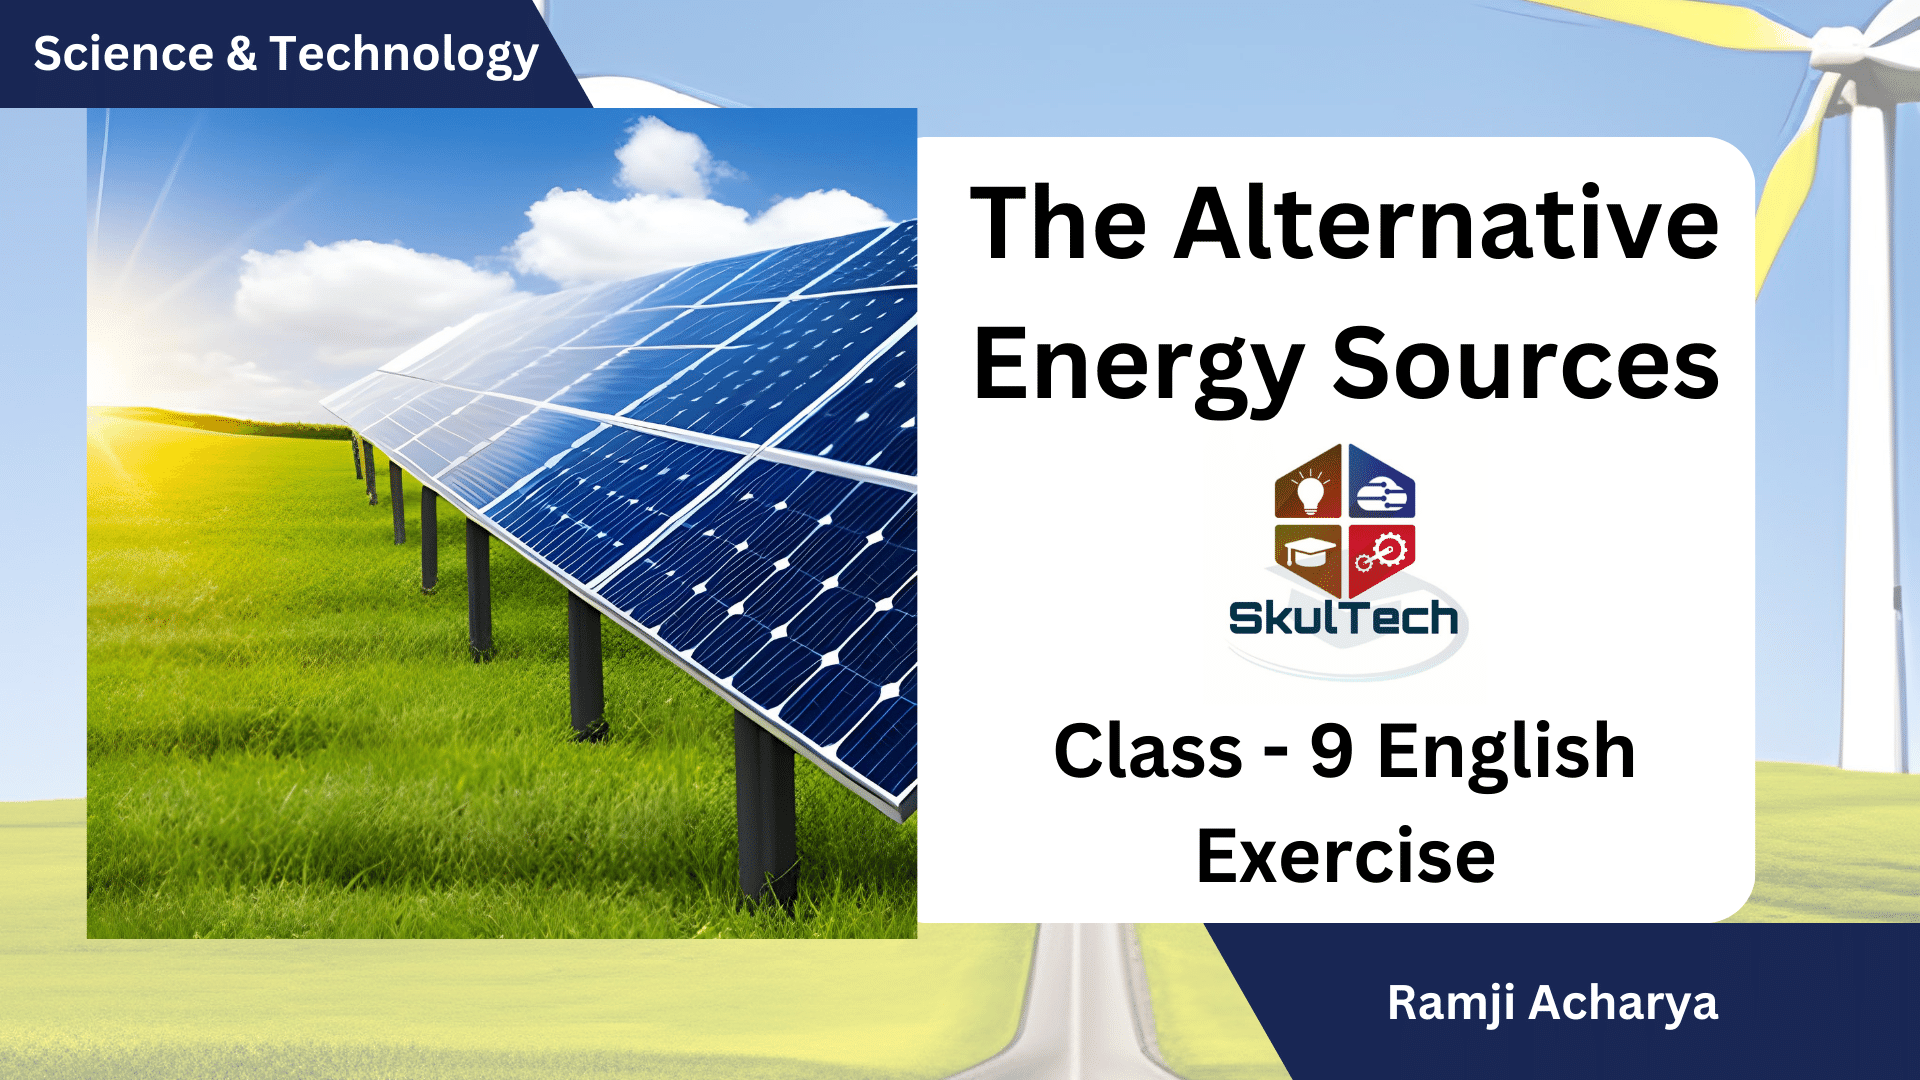 Unit-8 Science & Technology: The Alternative Energy Sources - Class 9 English Exercise